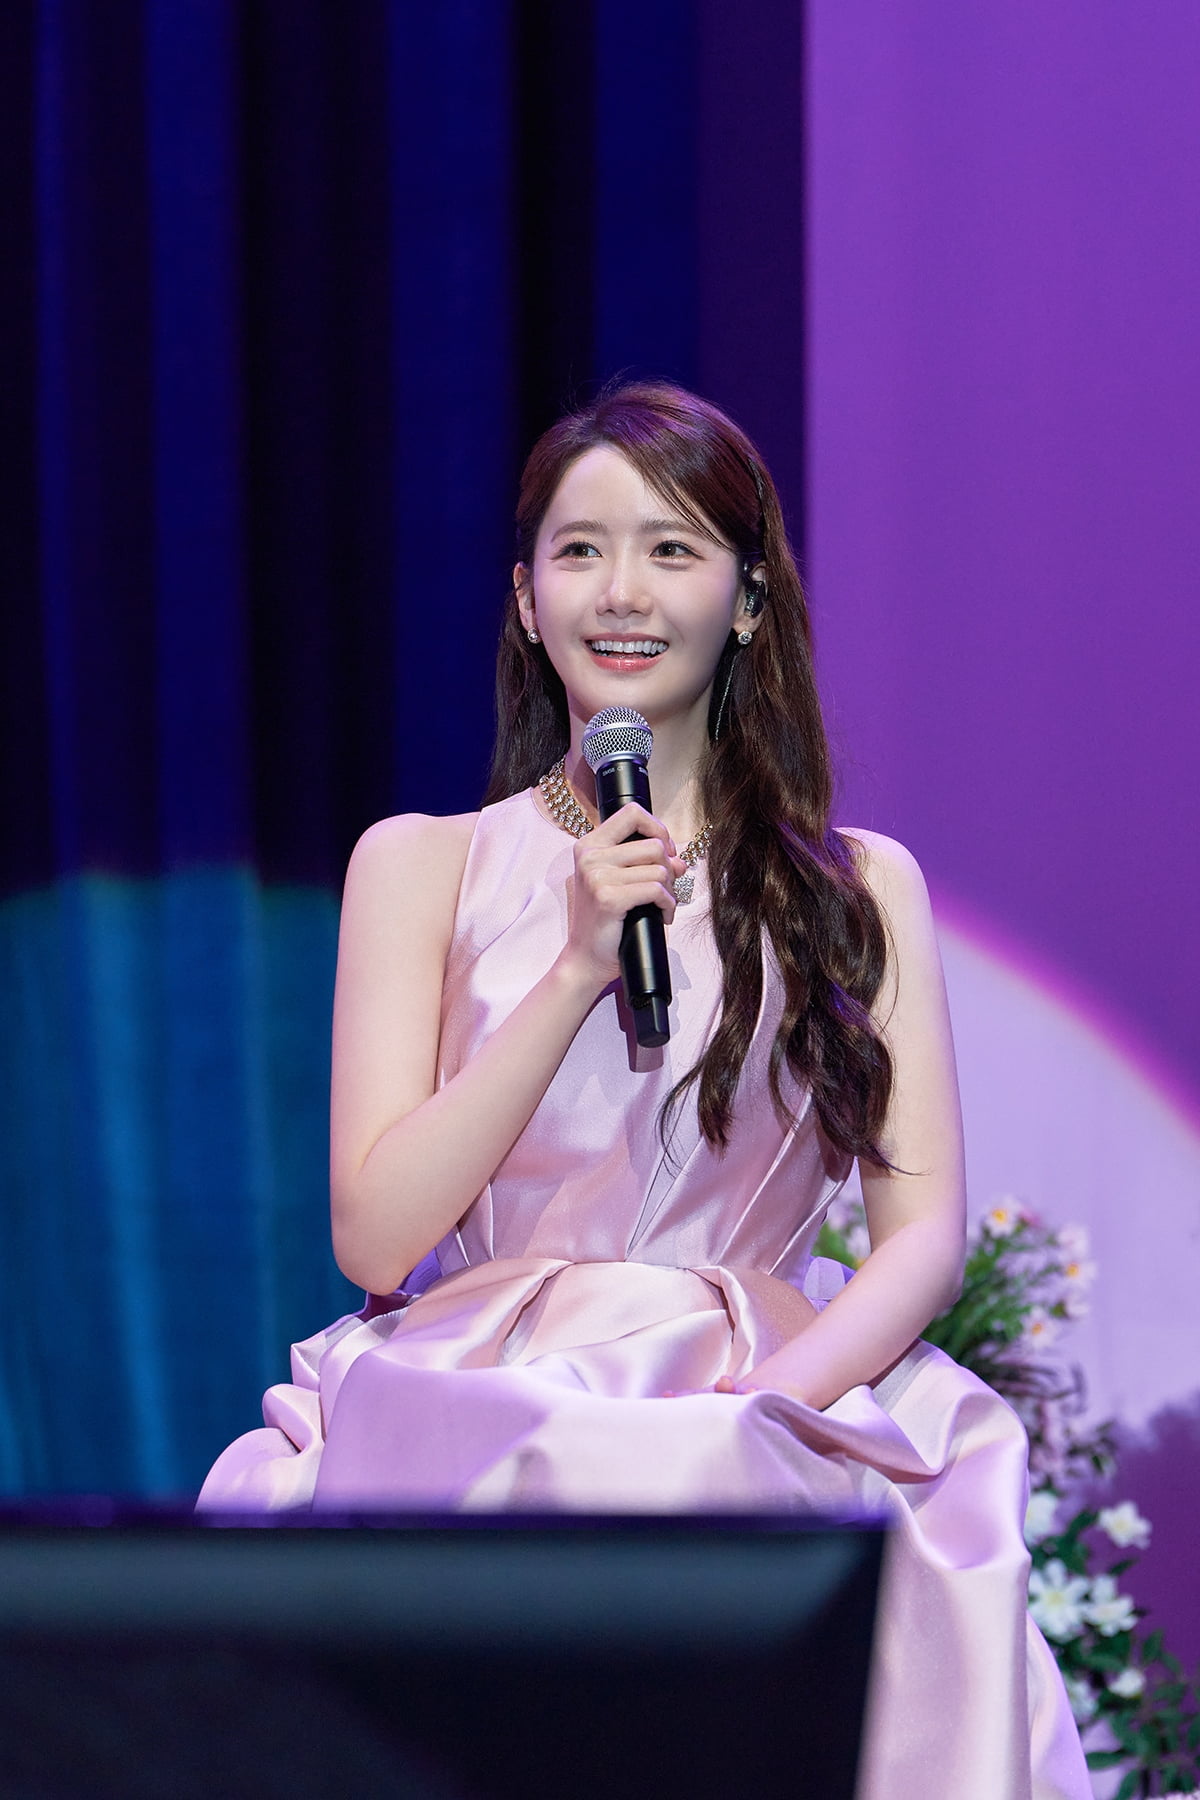 Lim Yoona, the pink color continues